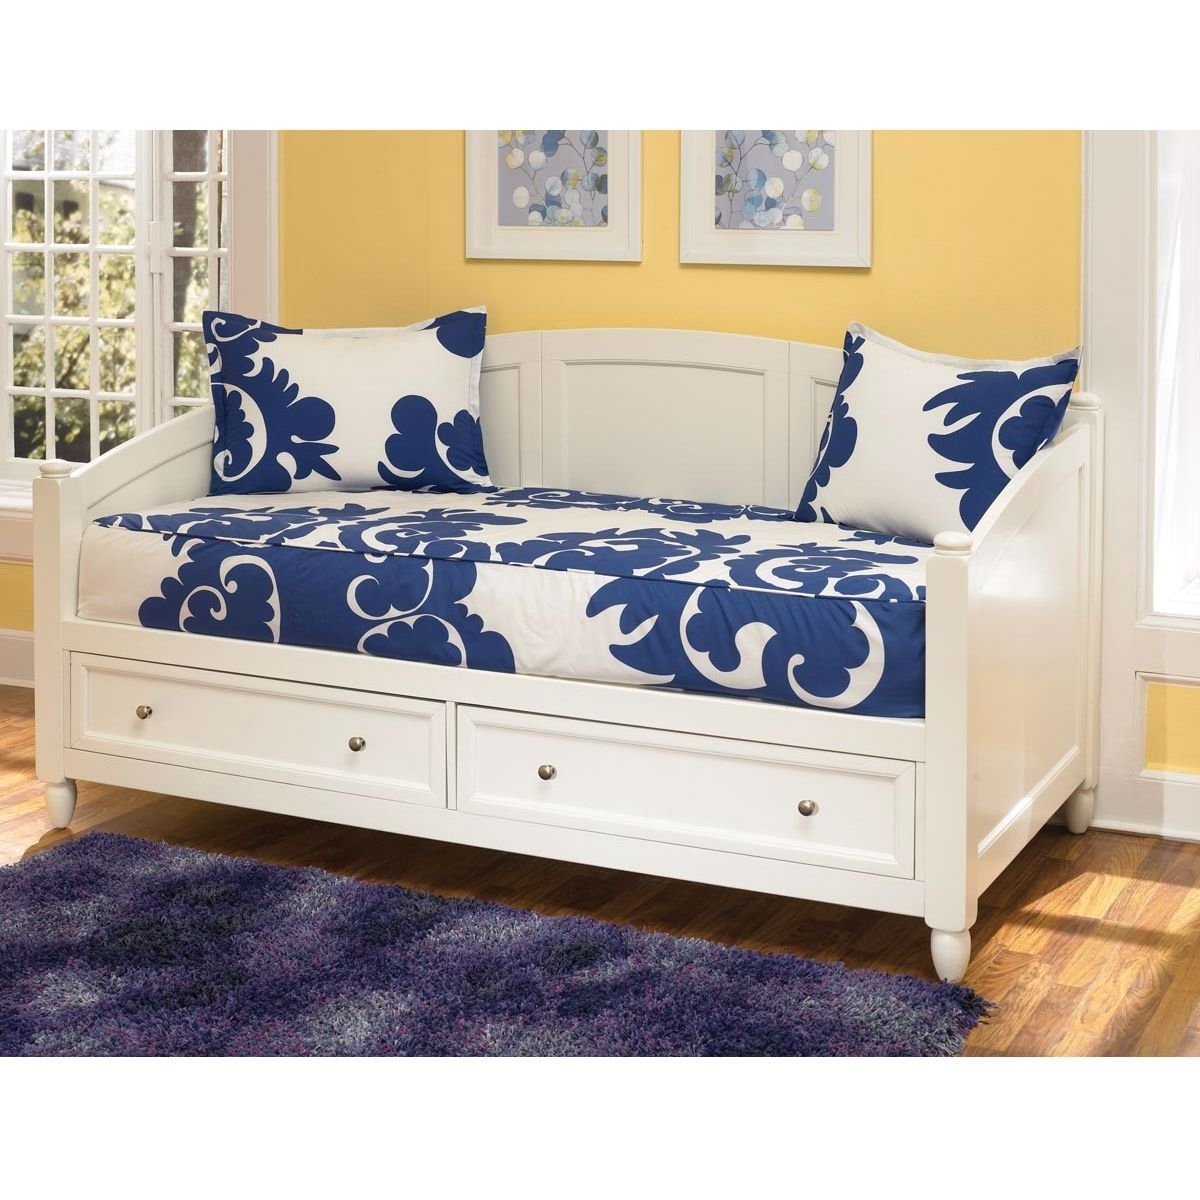 Home Styles 5530-85 Naples Daybed with Storage, White Finish